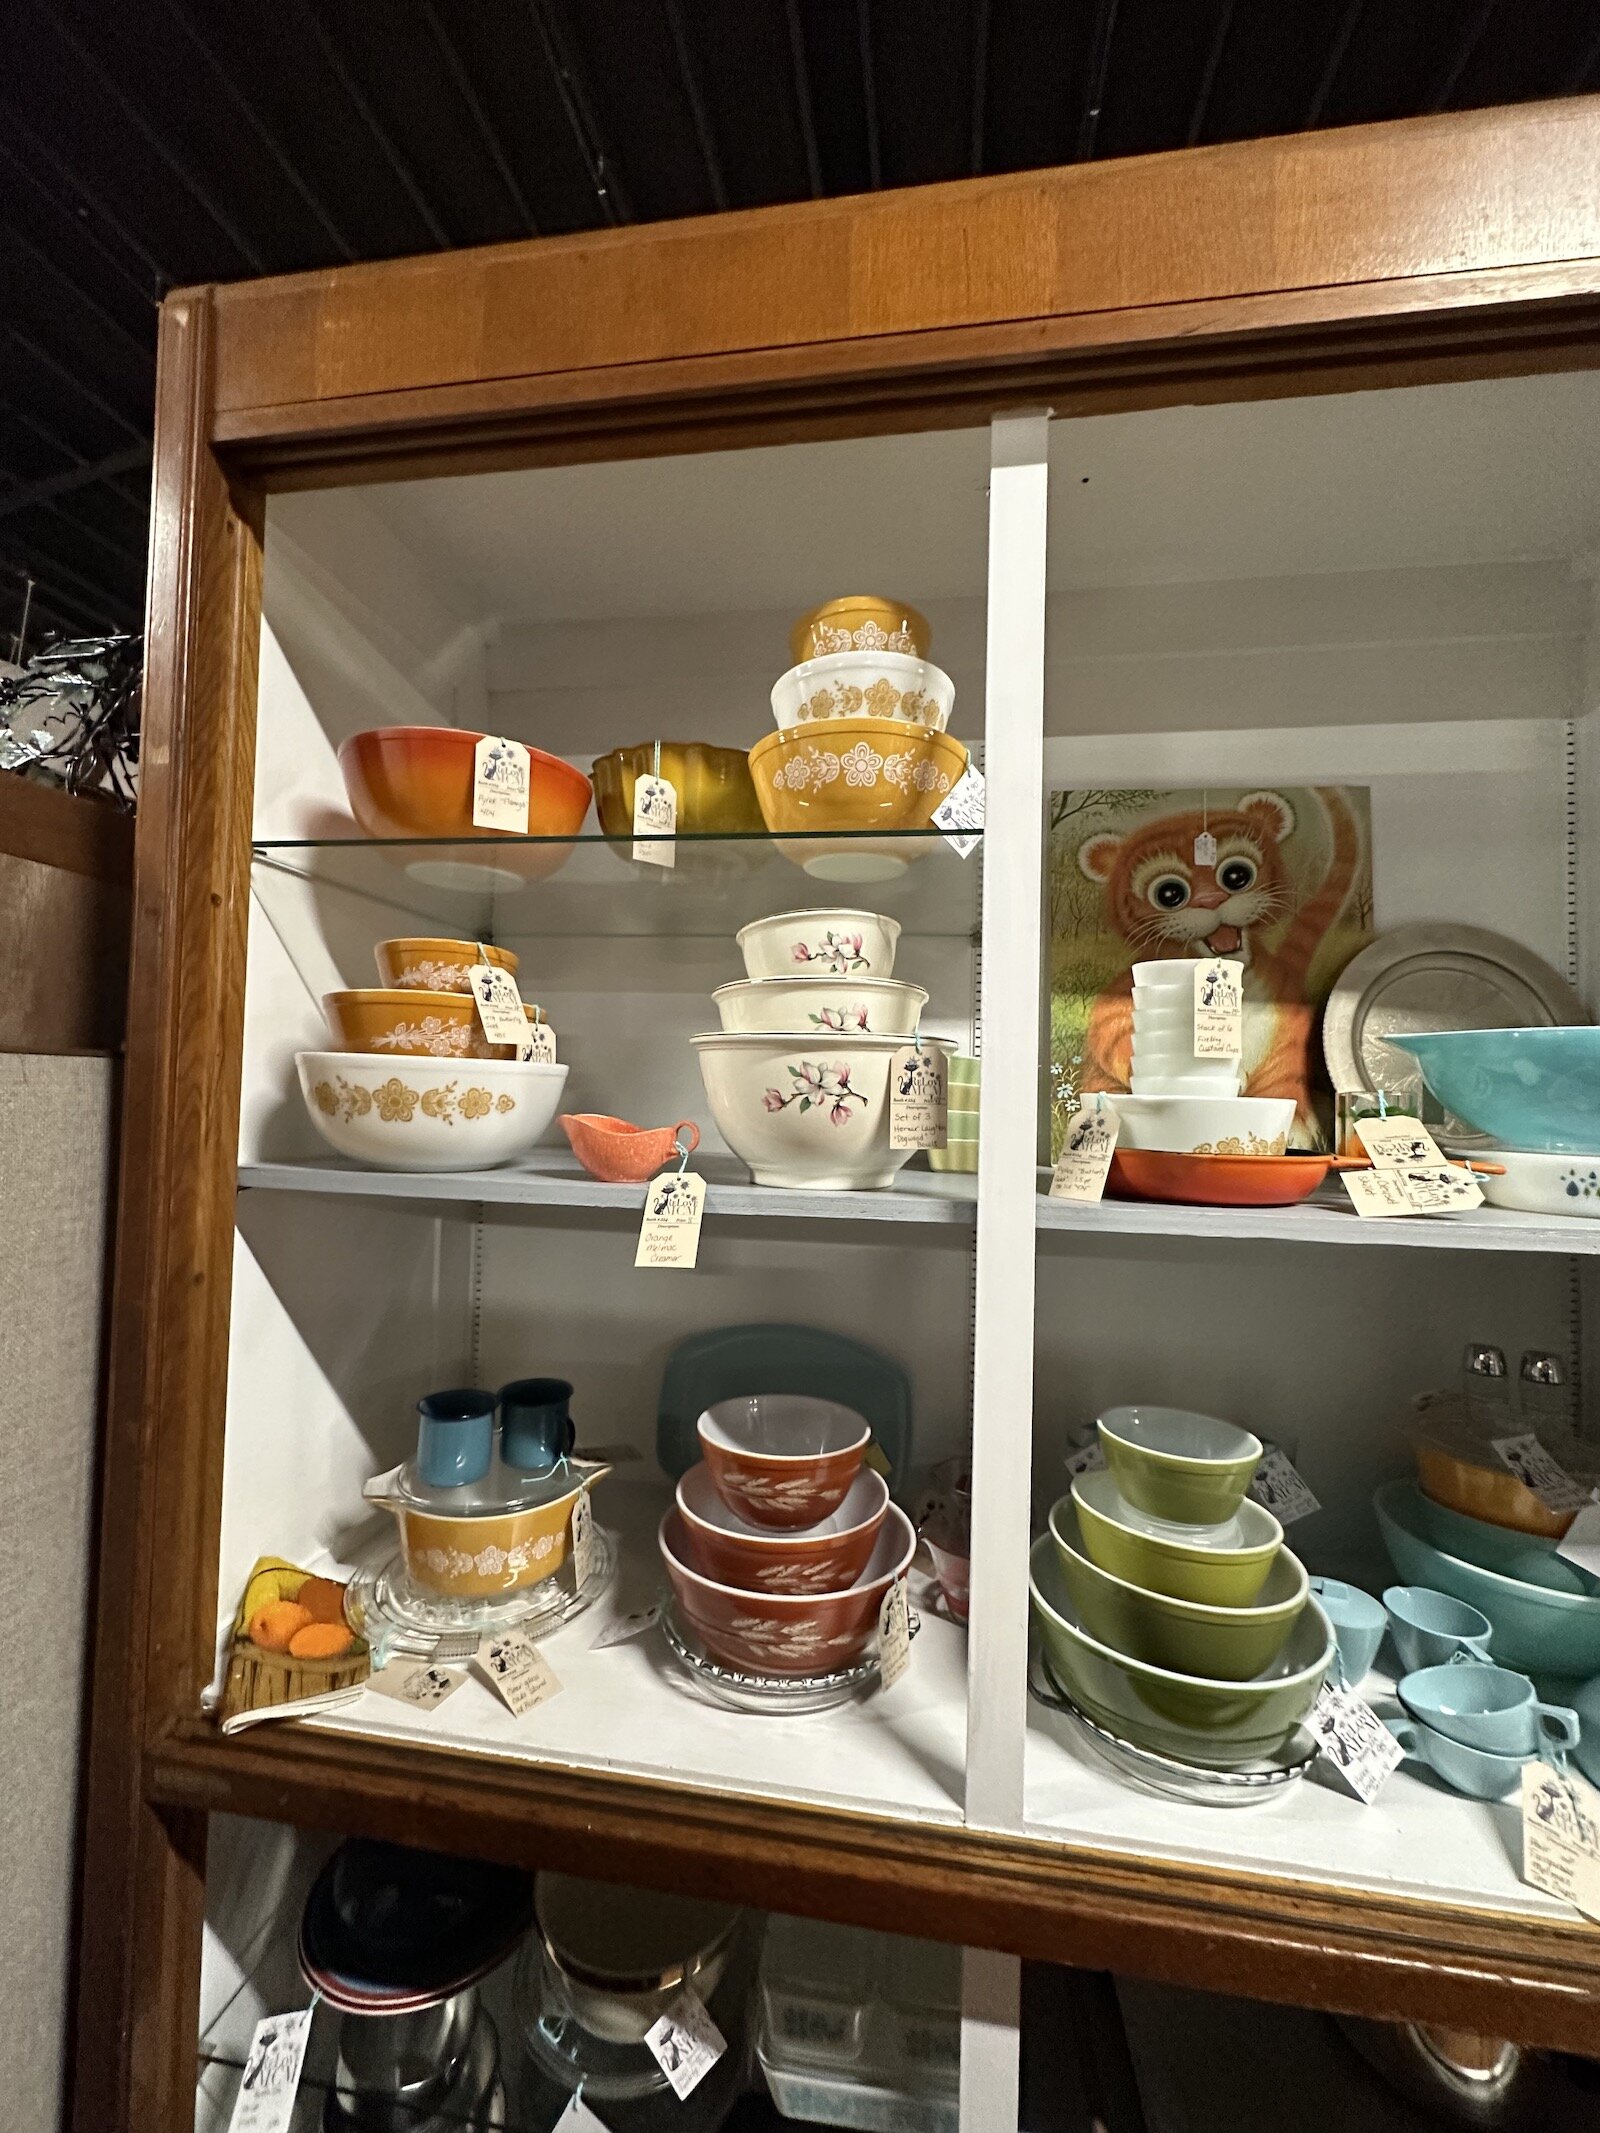 The Rink sells a variety of vintage items, including home goods like Pyrex sets.